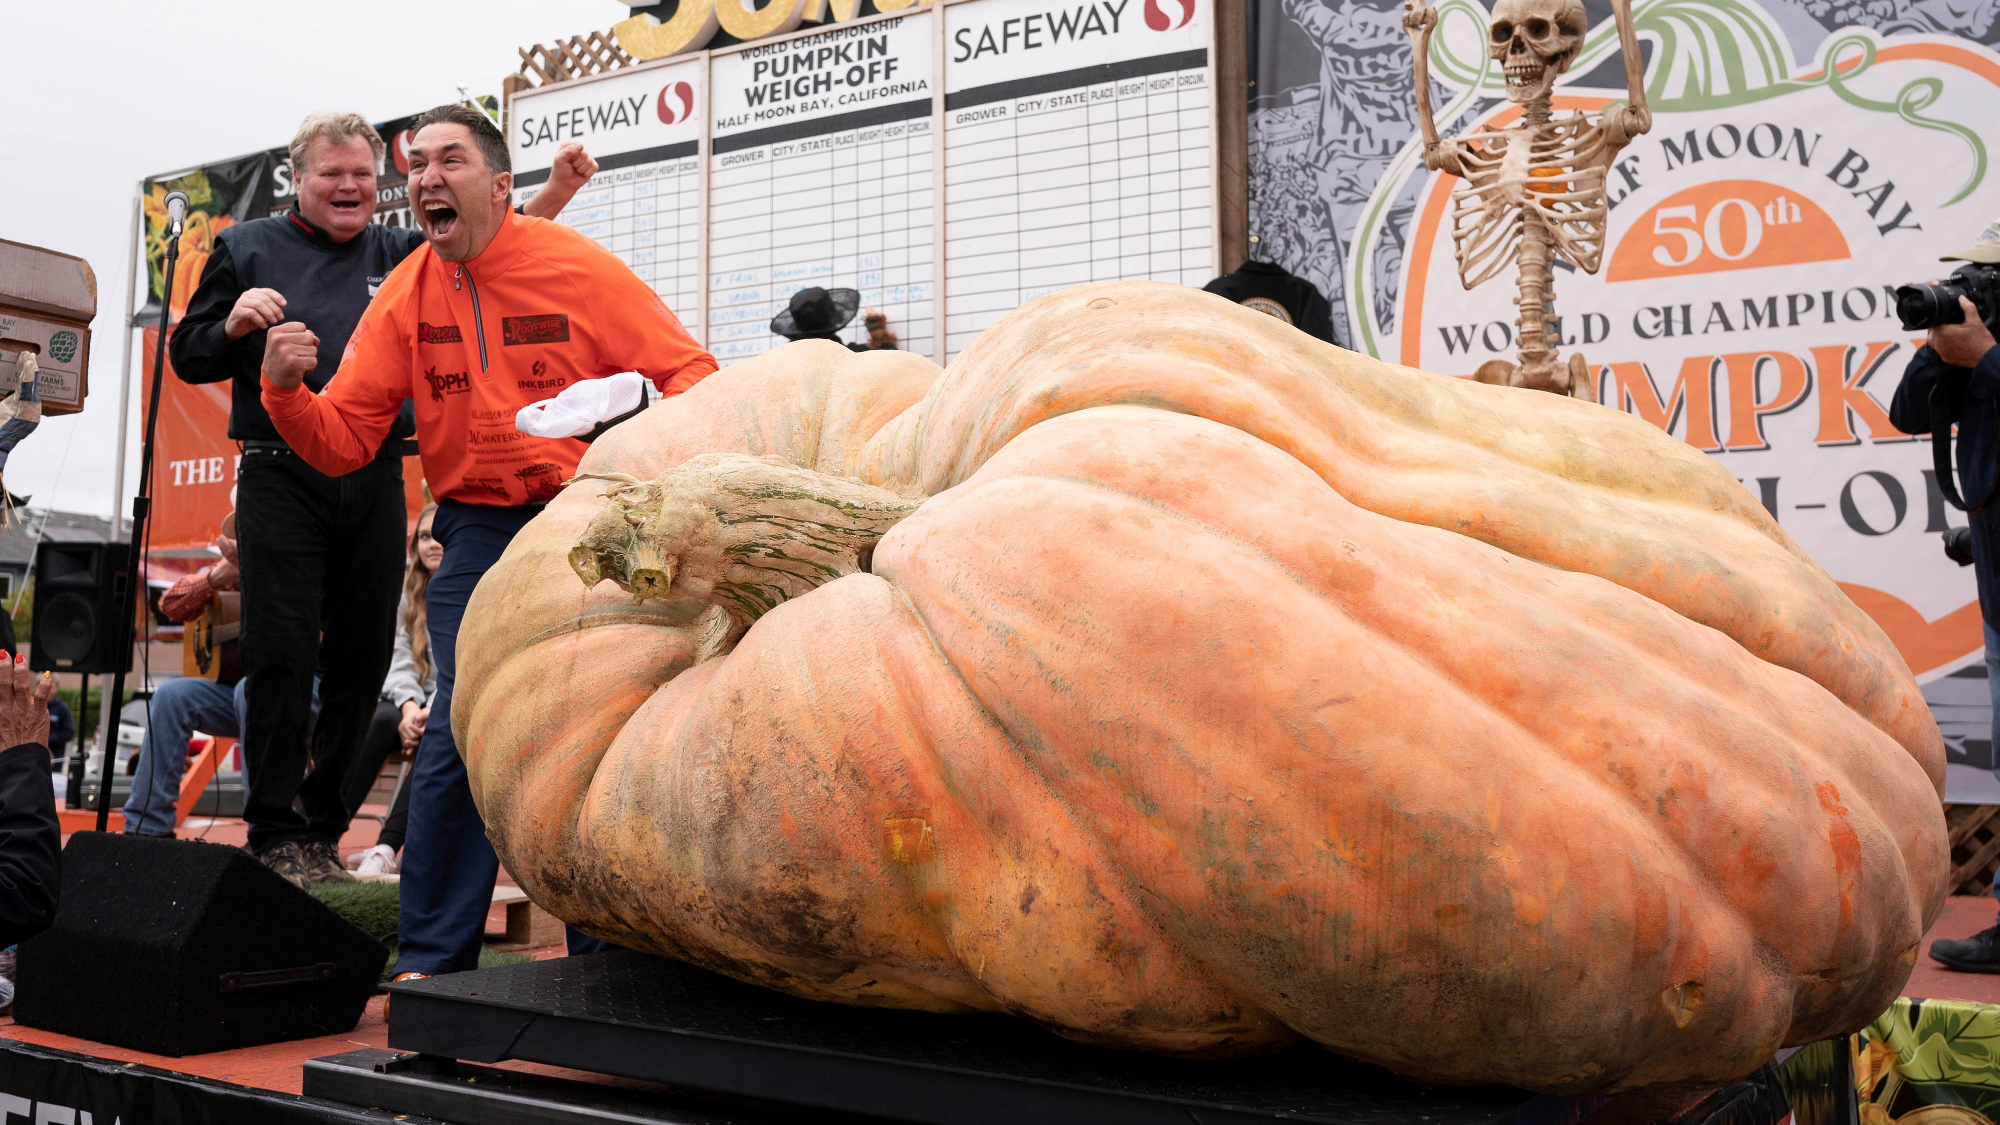 This year’s heaviest pumpkin could be baked into 700 pies